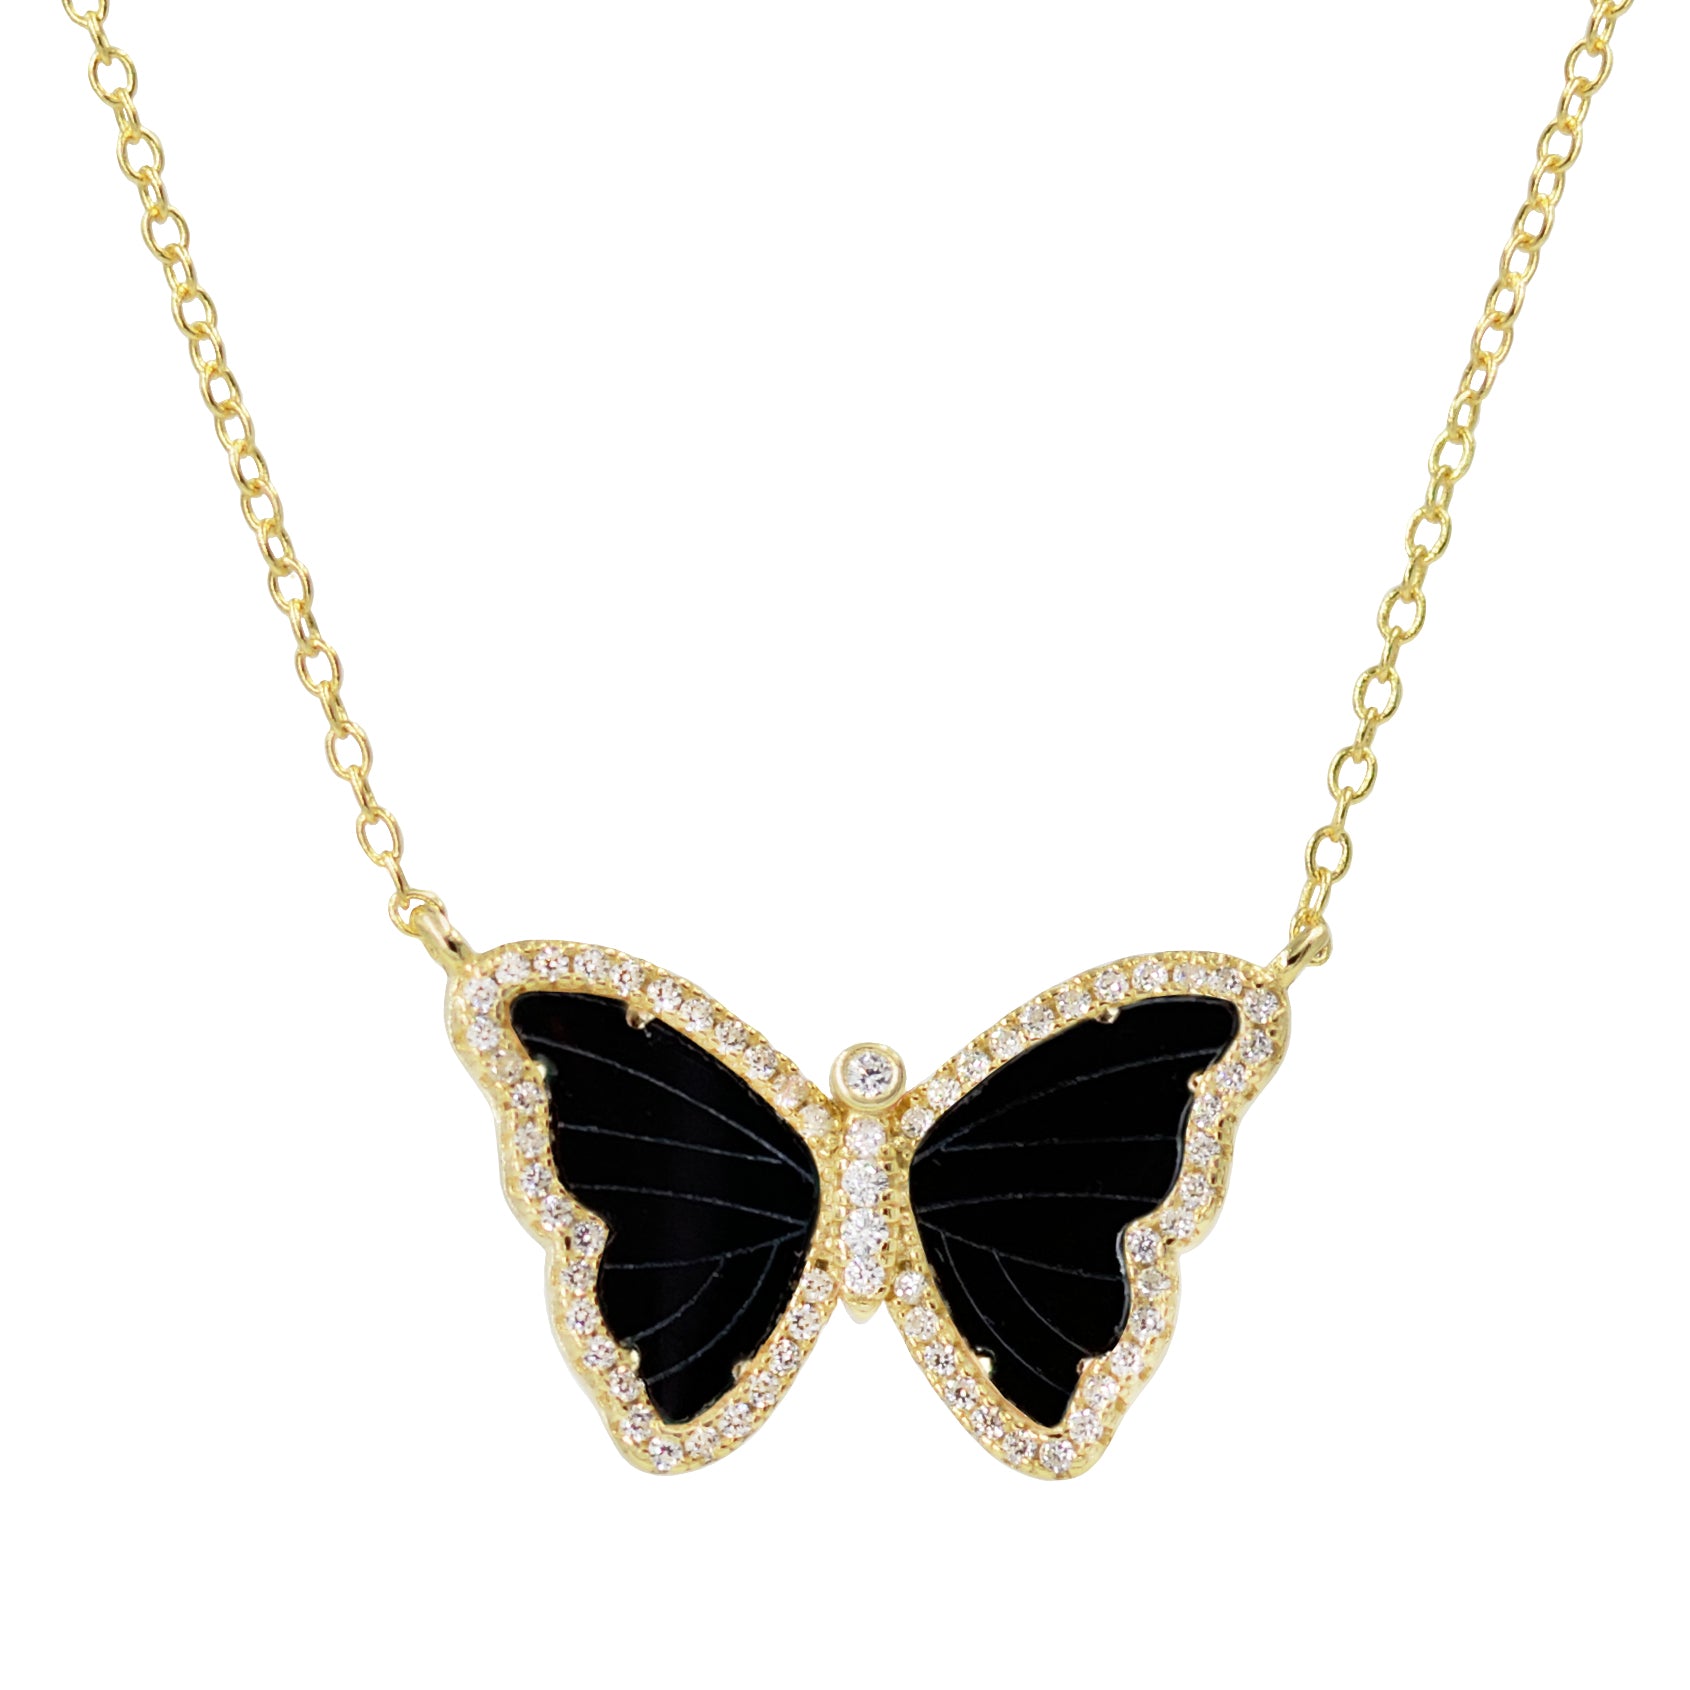 black onyx butterfly necklace with crystals in yellow gold